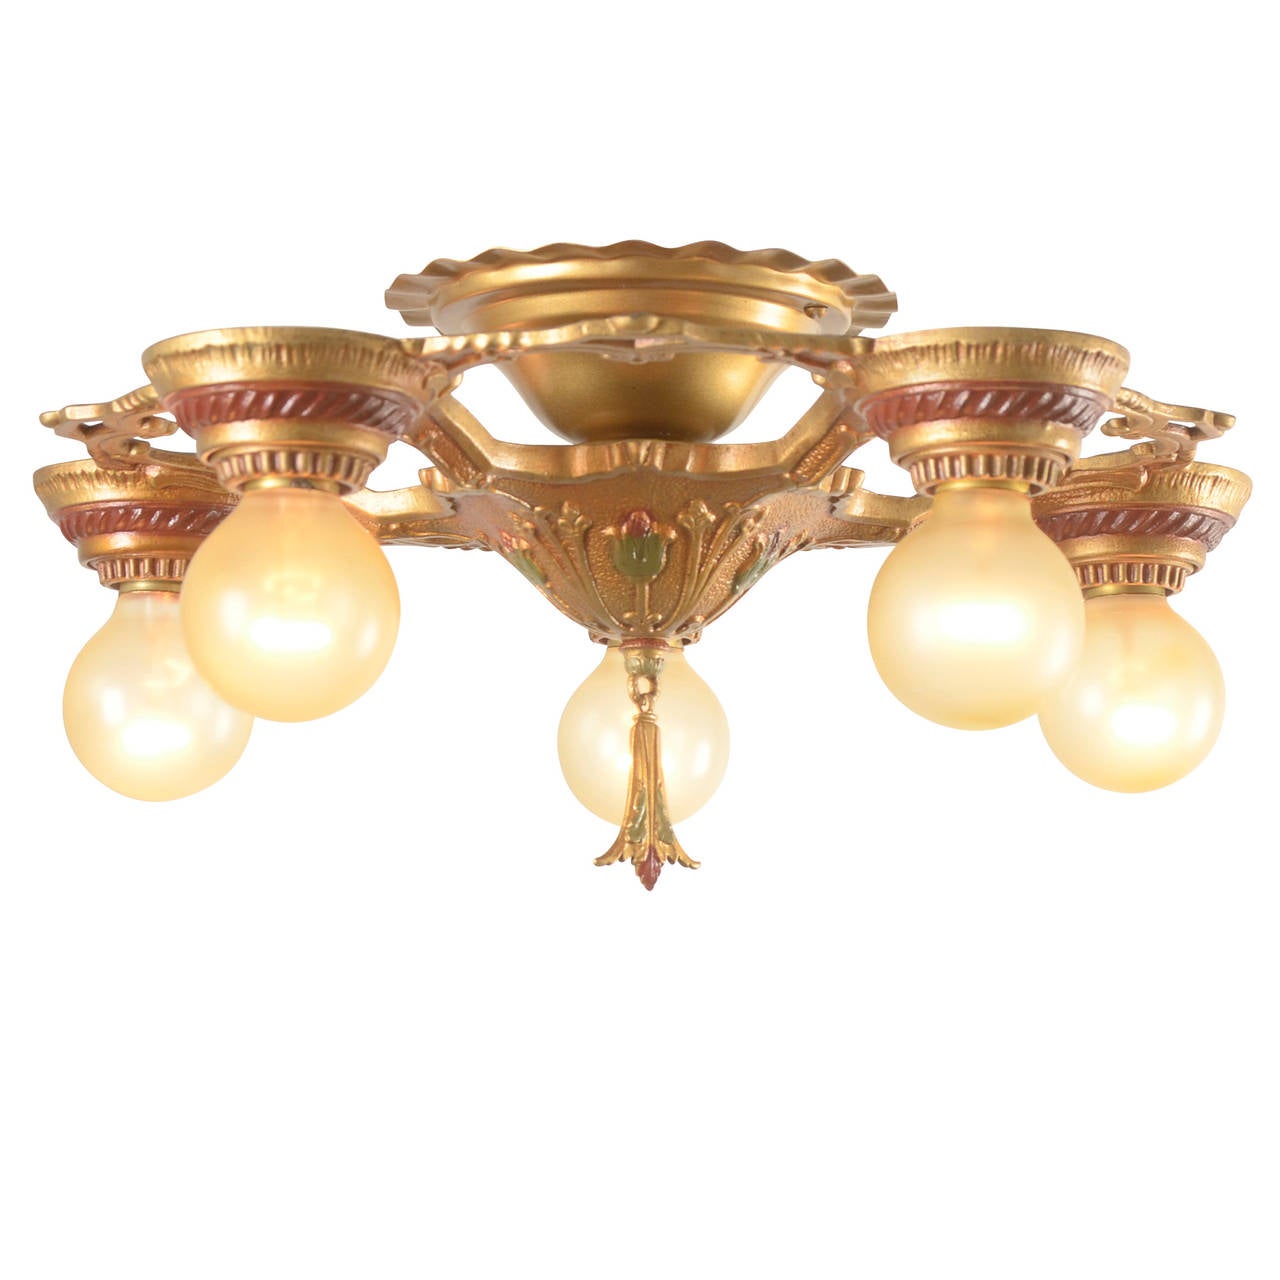 The late 1920s saw an explosion in the popularity of decorative cast white-metal fixtures with exposed globe bulbs and rich polychrome finishes like this example. Romantically decorative, this fixture has the added advantage of being a semi-flush